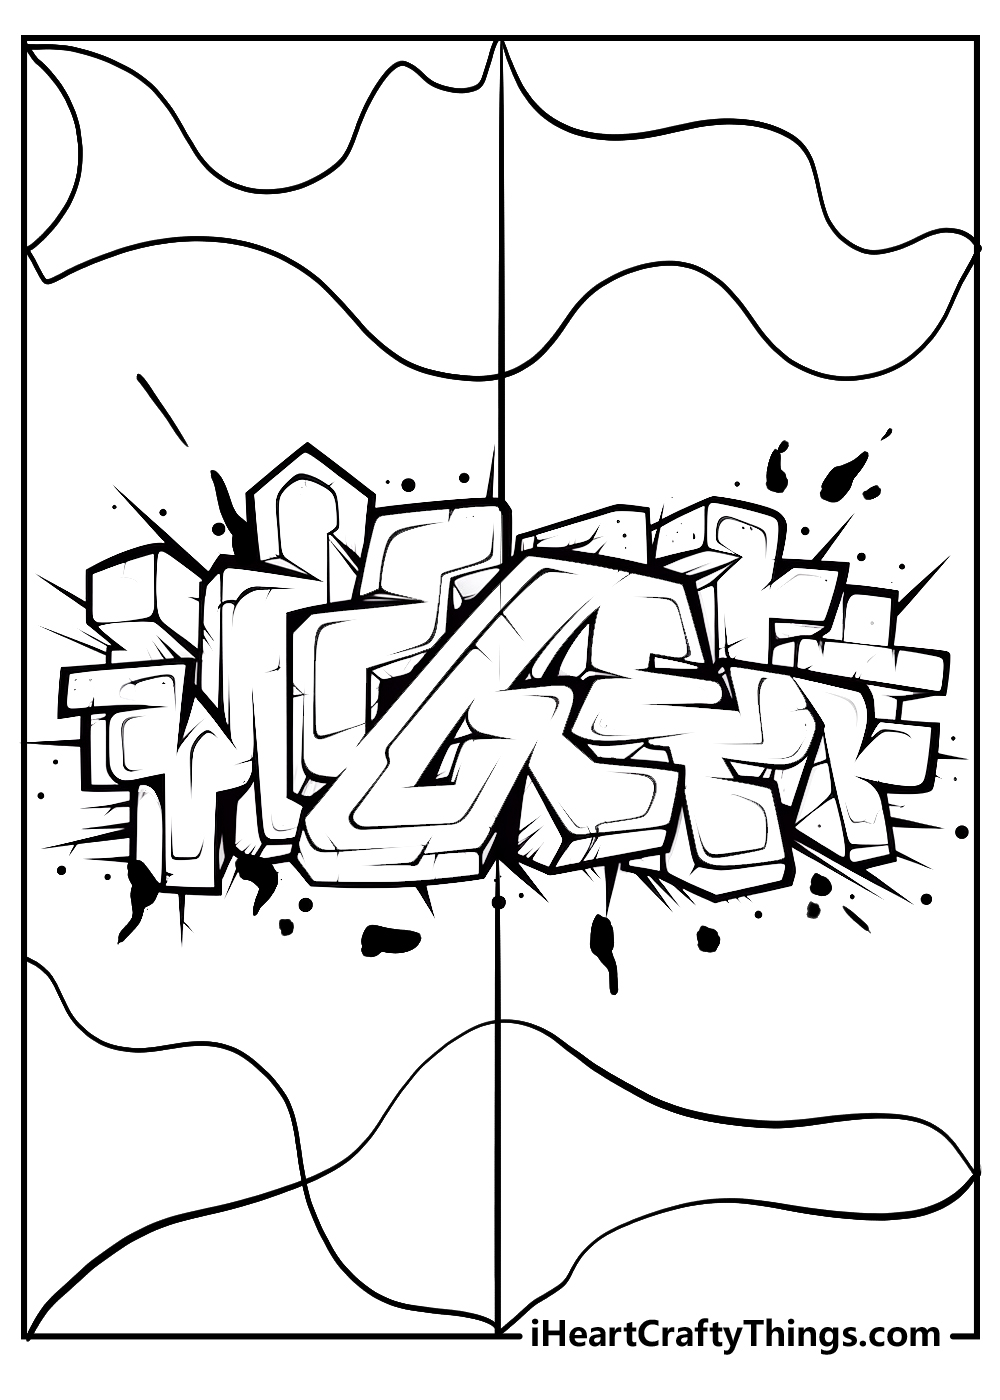 easy graffiti coloring pages